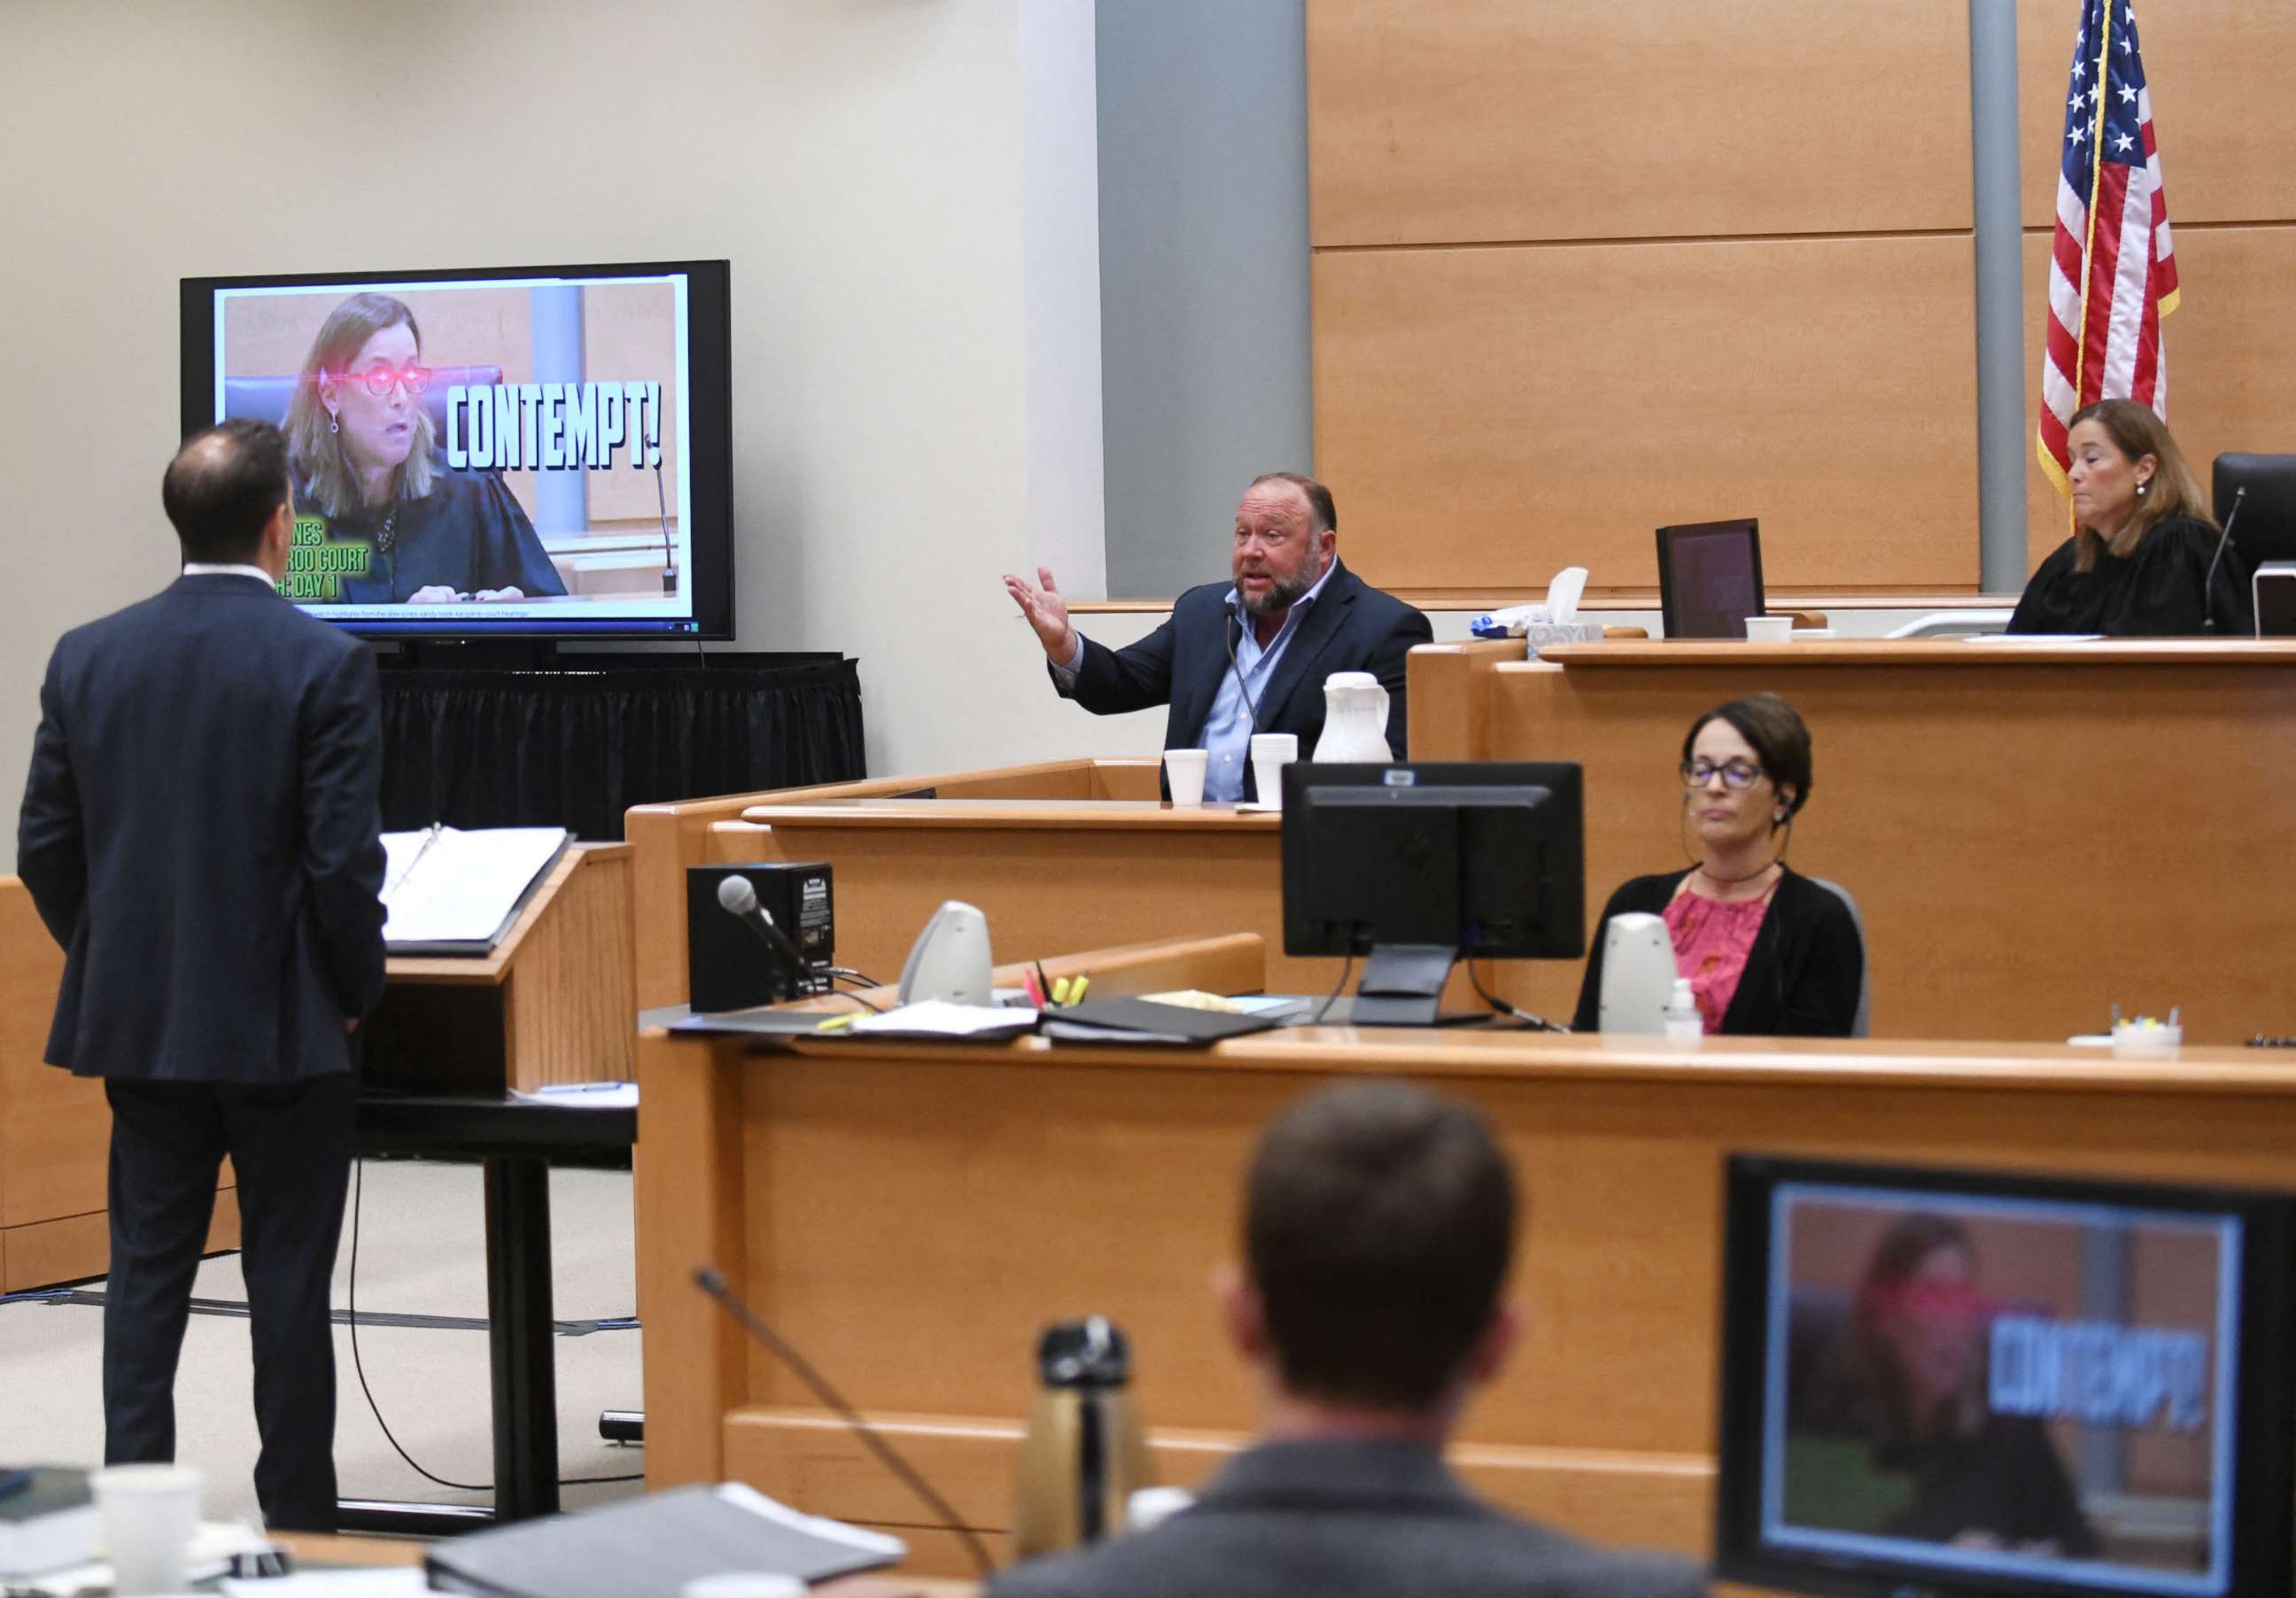 PHOTO: Infowars founder Alex Jones takes the witness stand to testify during the Alex Jones Sandy Hook defamation damages trial at Connecticut Superior Court in Waterbury, Connecticut, U.S., September 22, 2022.